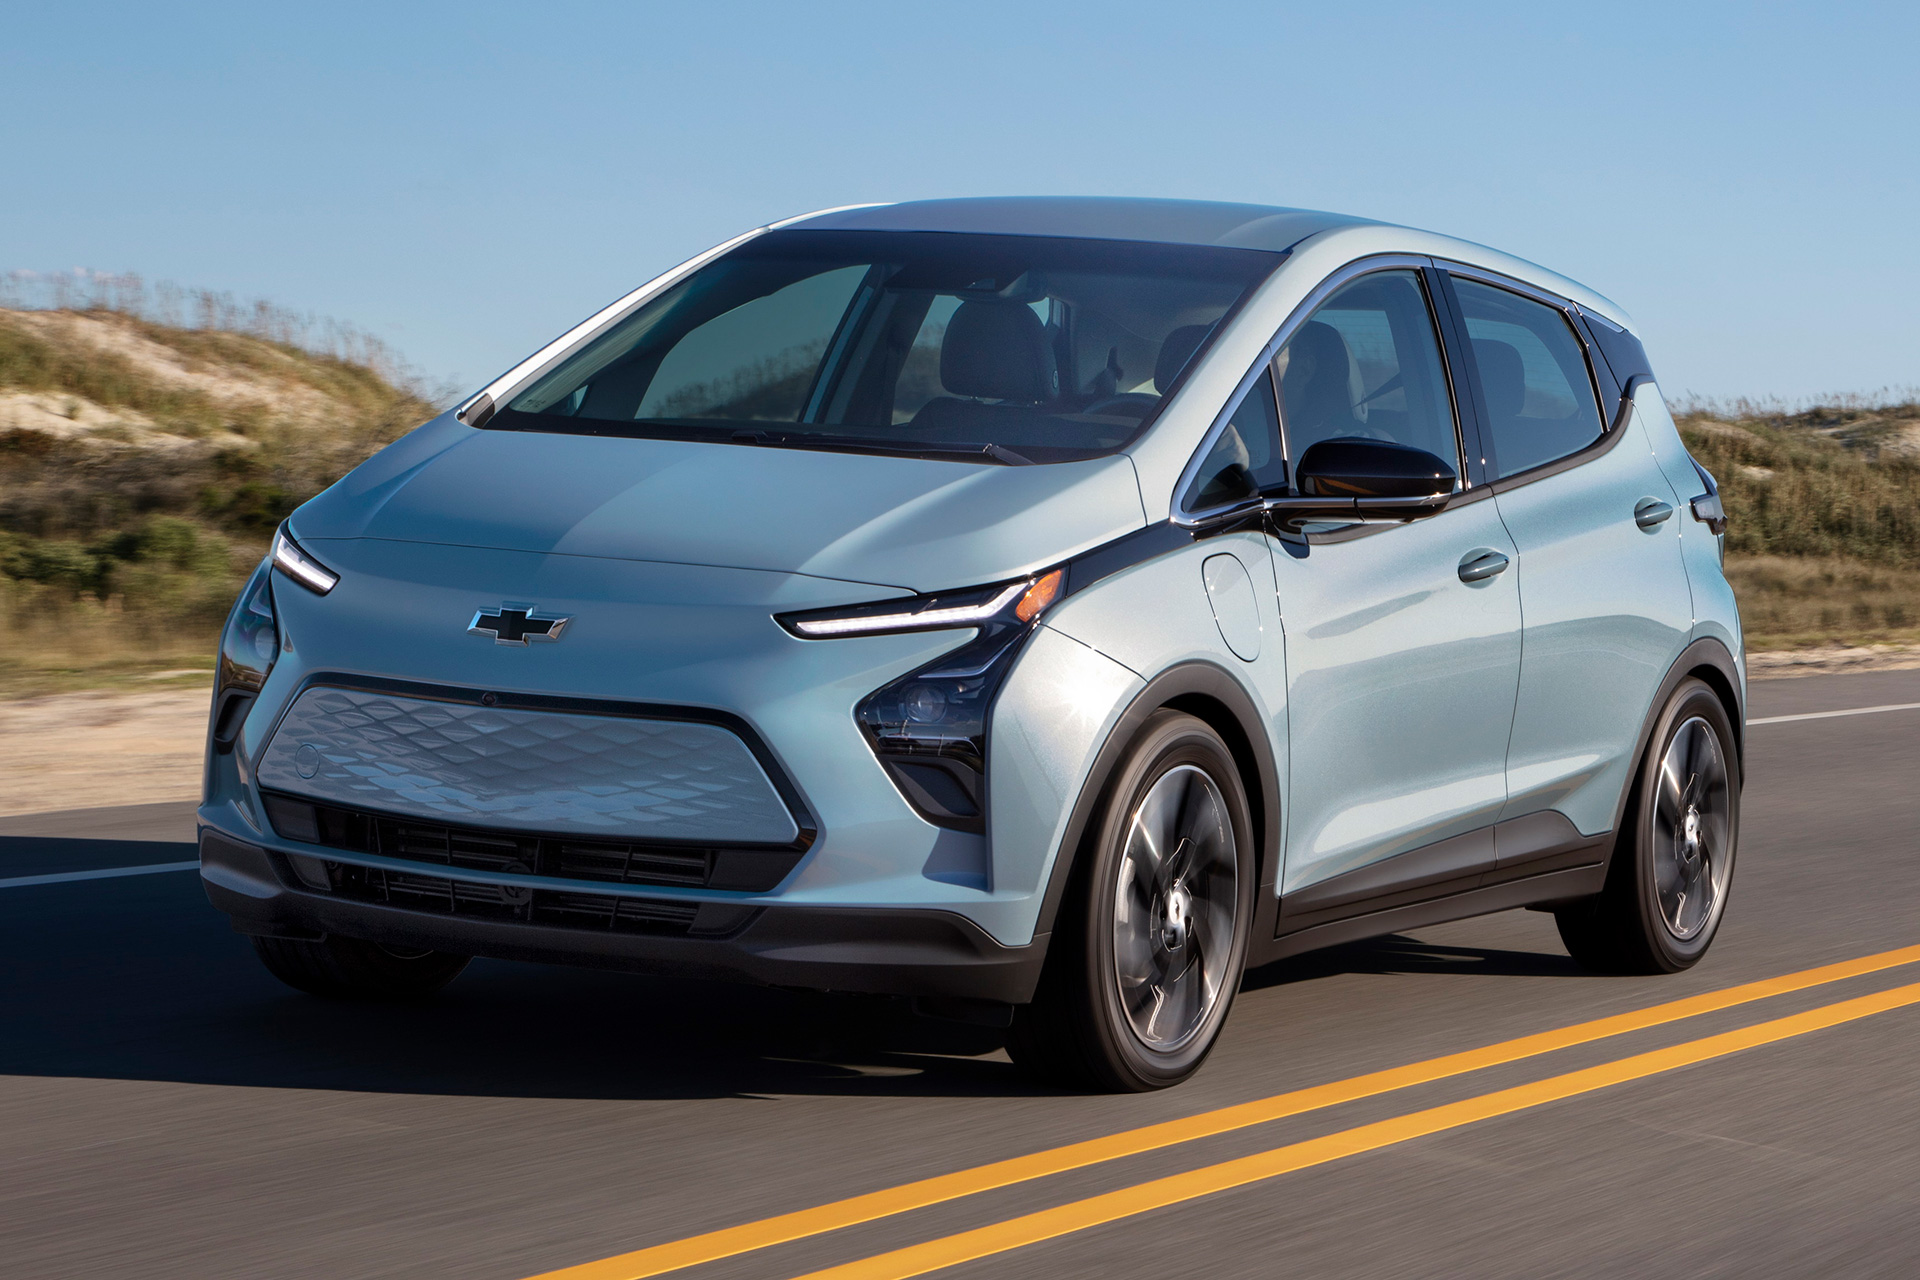 Chevy Bolt owners must choose between rebates and battery defect lawsuits